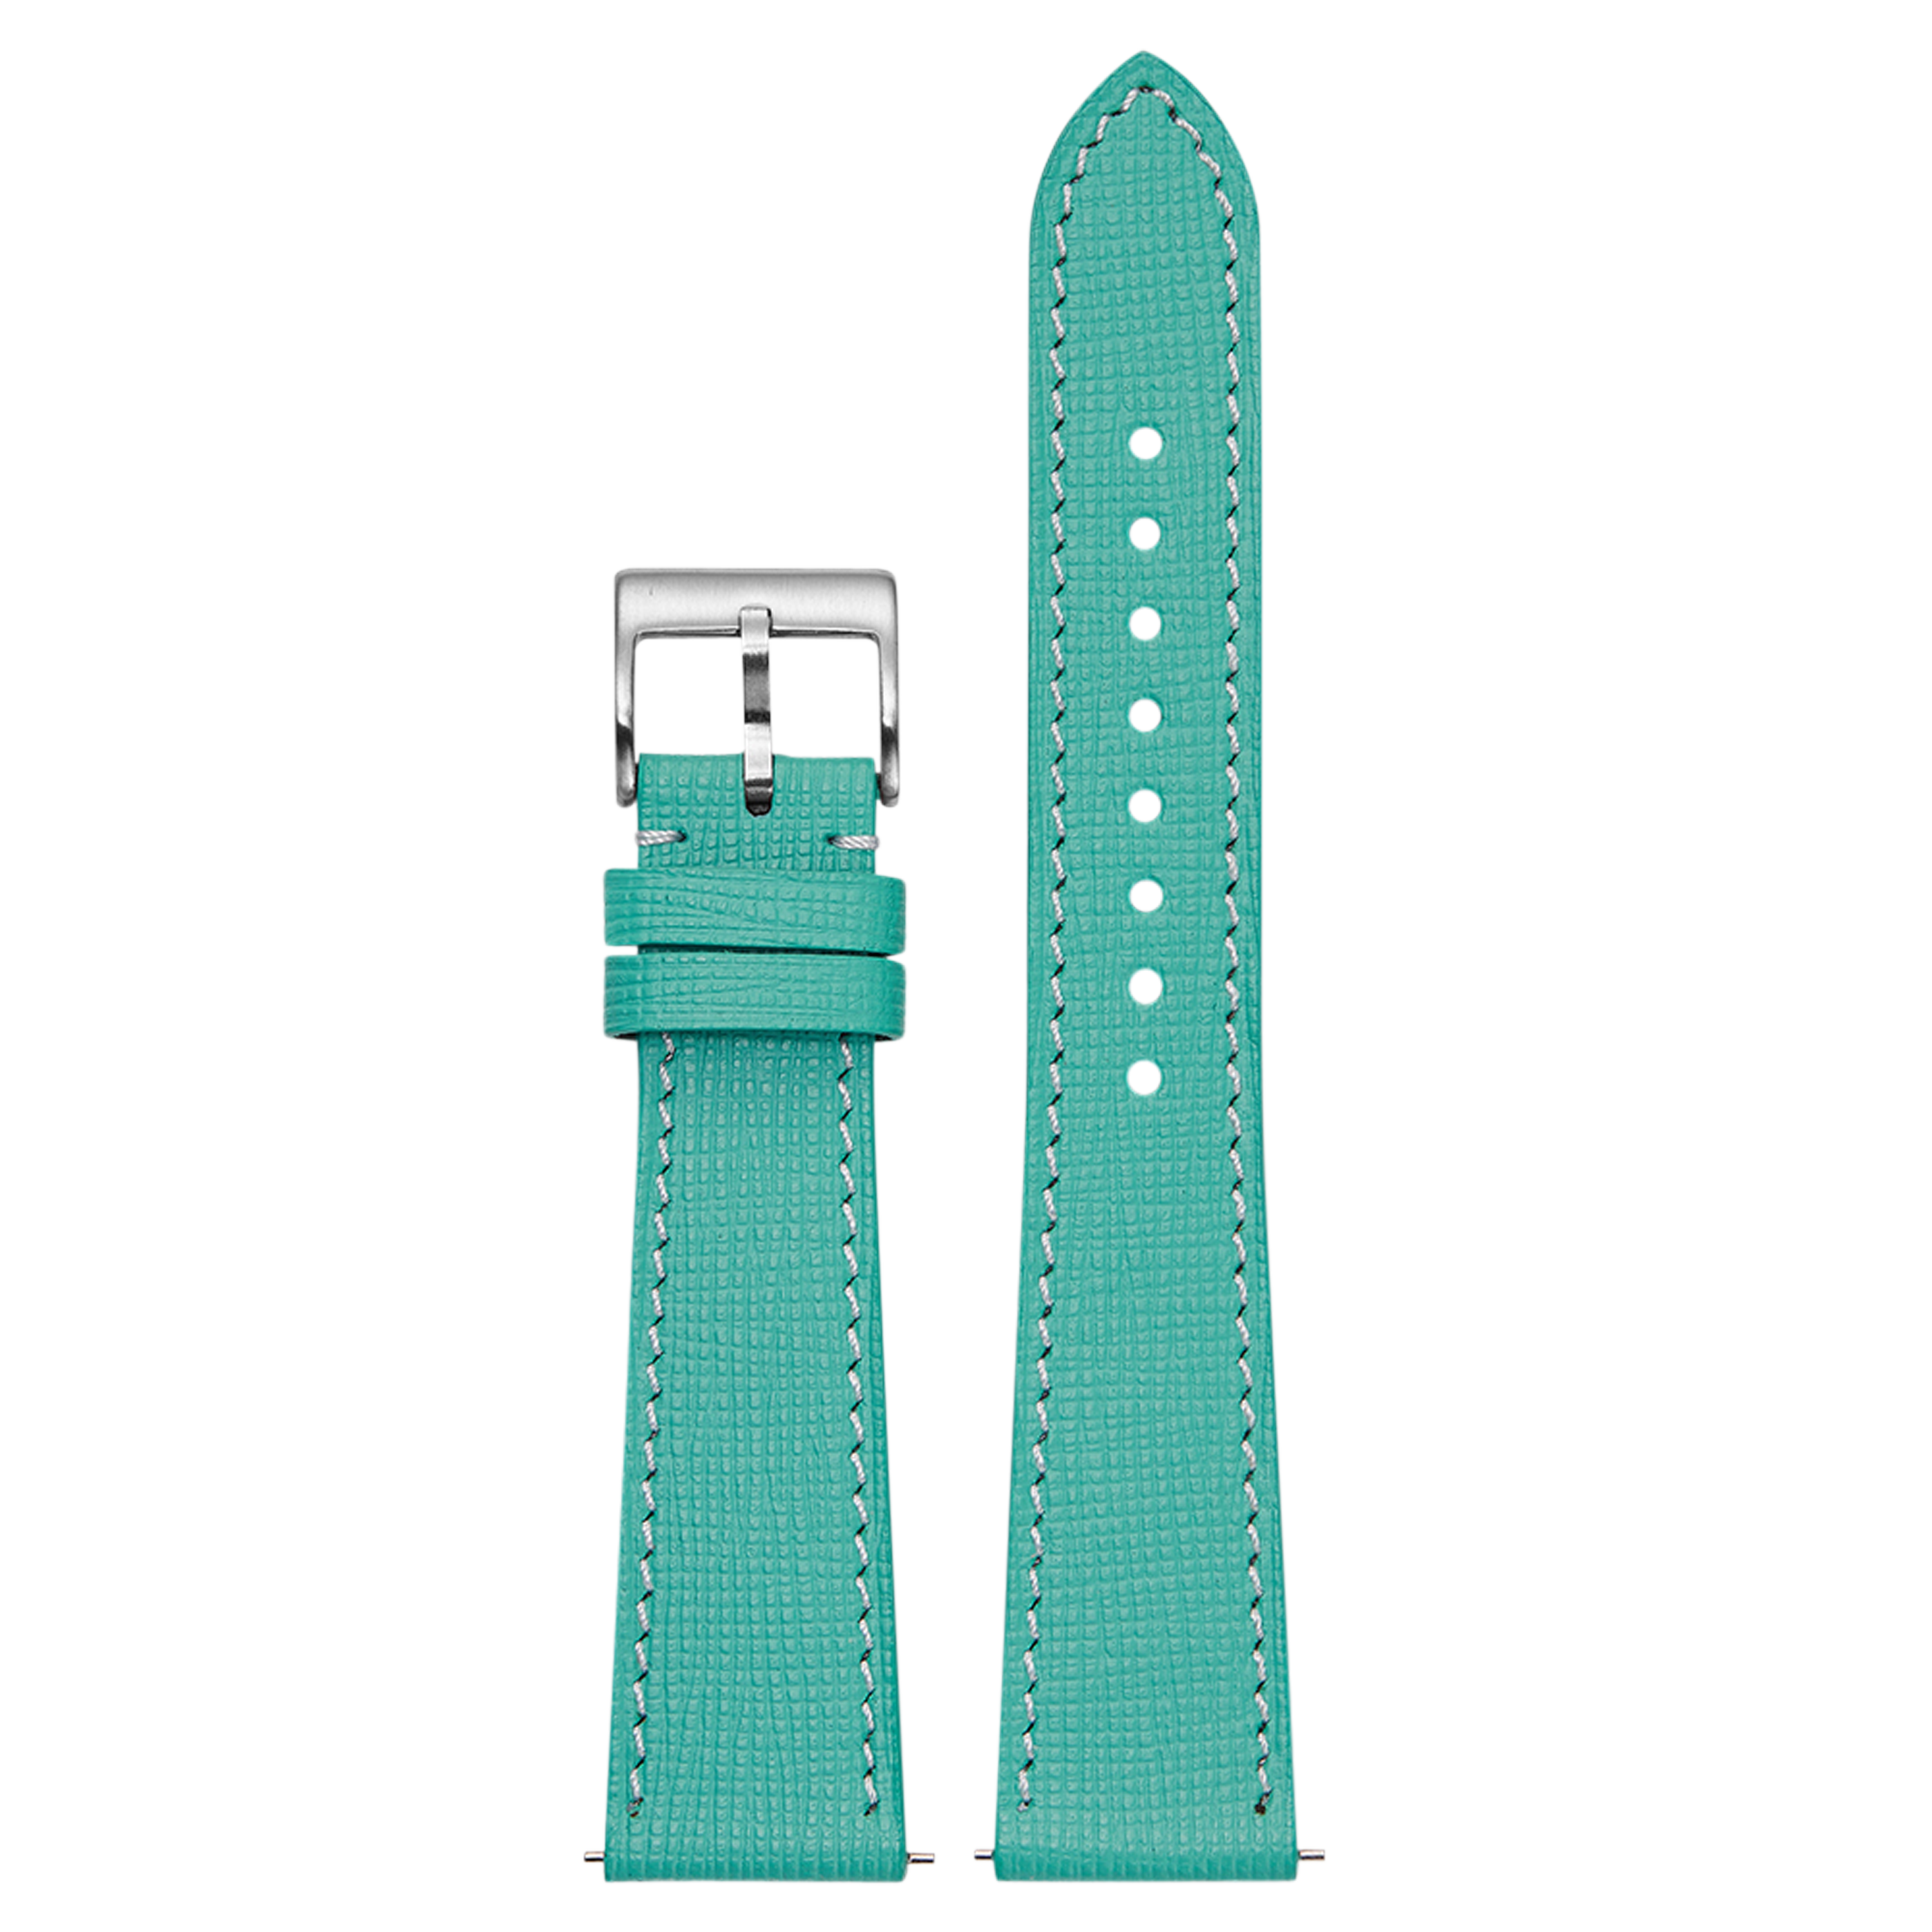 [QuickFit] Chevre Saffiano Leather - Tiffany Blue with White Stitching 20mm